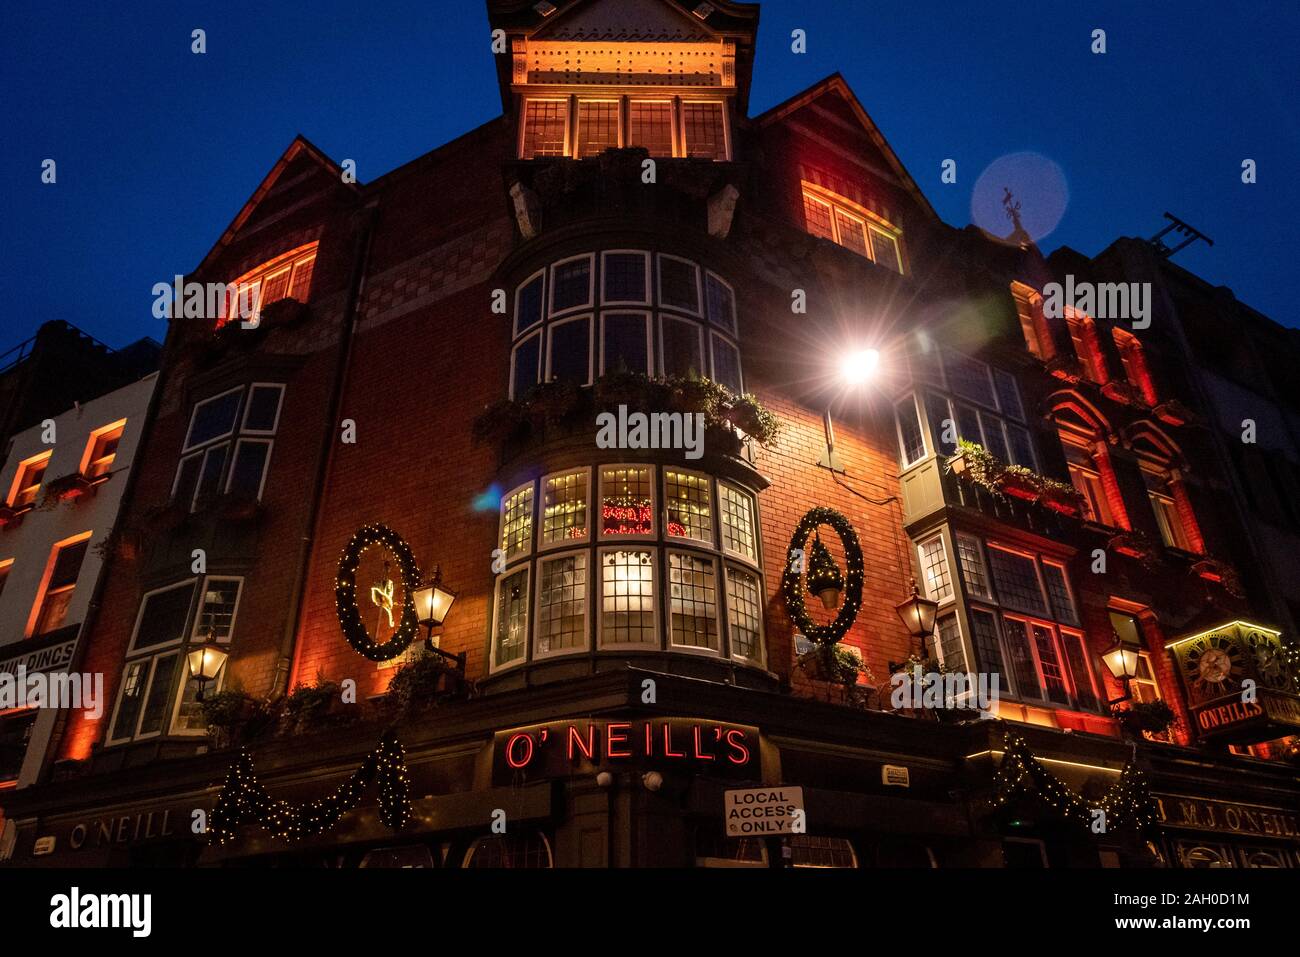 DUBLIN, IRELAND, DECEMBER 24, 2018: View of the exterior of the O'Neill's Pub and Kitchen on Suffolk Street, dimly lit and decorated for christmas Stock Photo